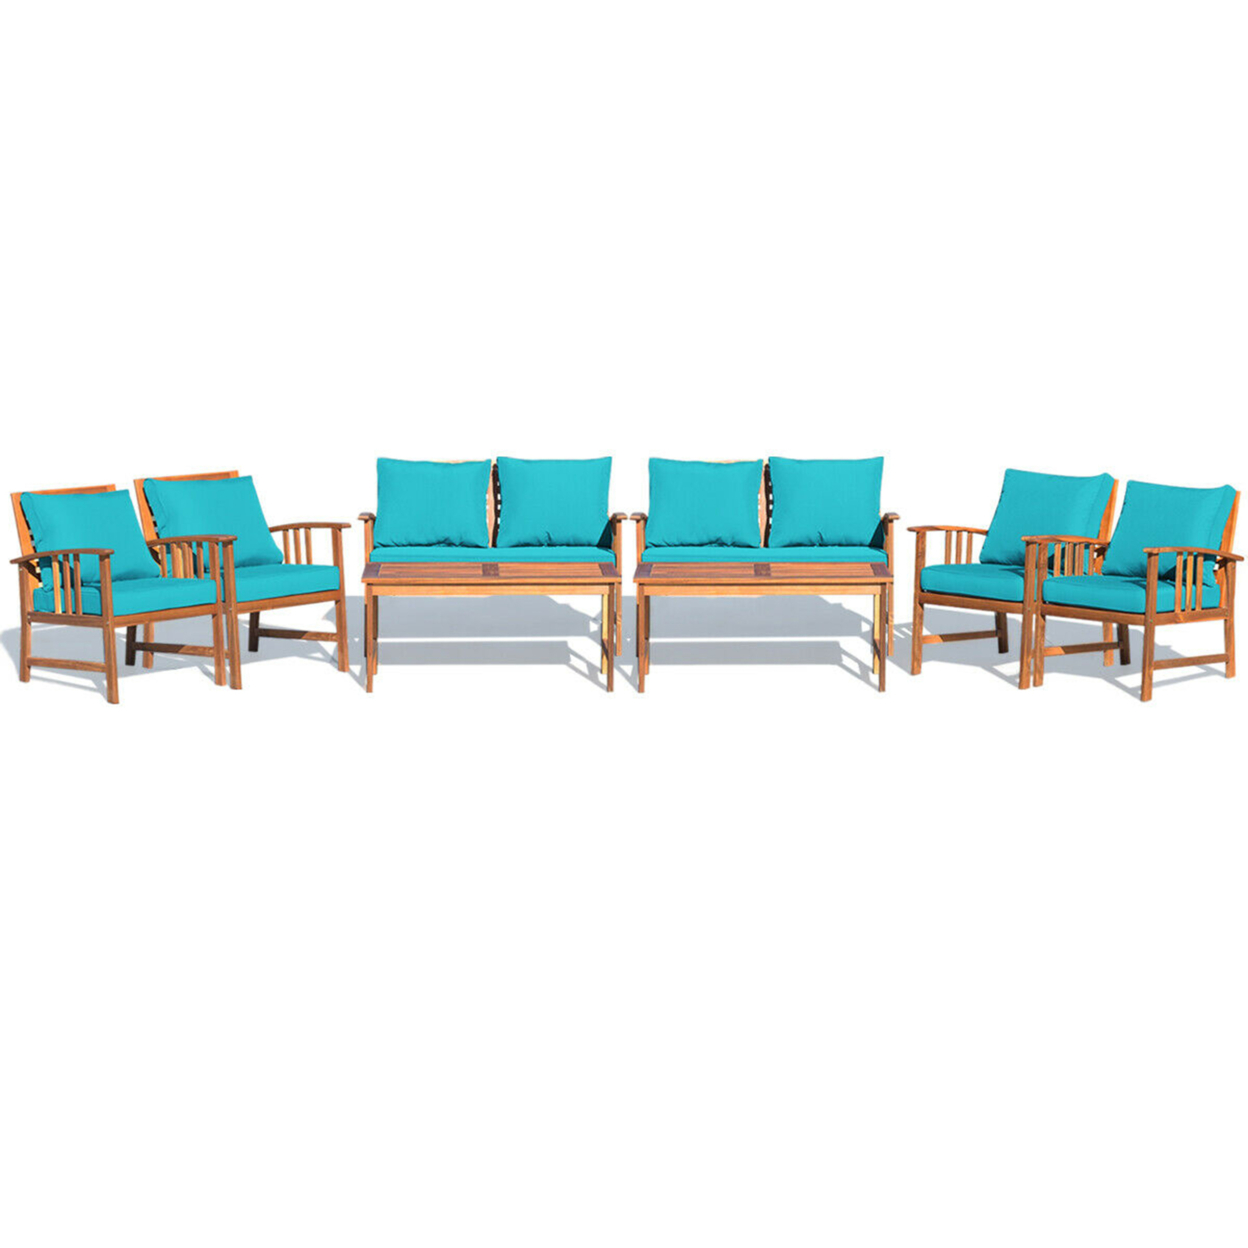 8pcs Wooden Patio Furniture Set Table & Sectional Sofa W/ Turquoise Cushion